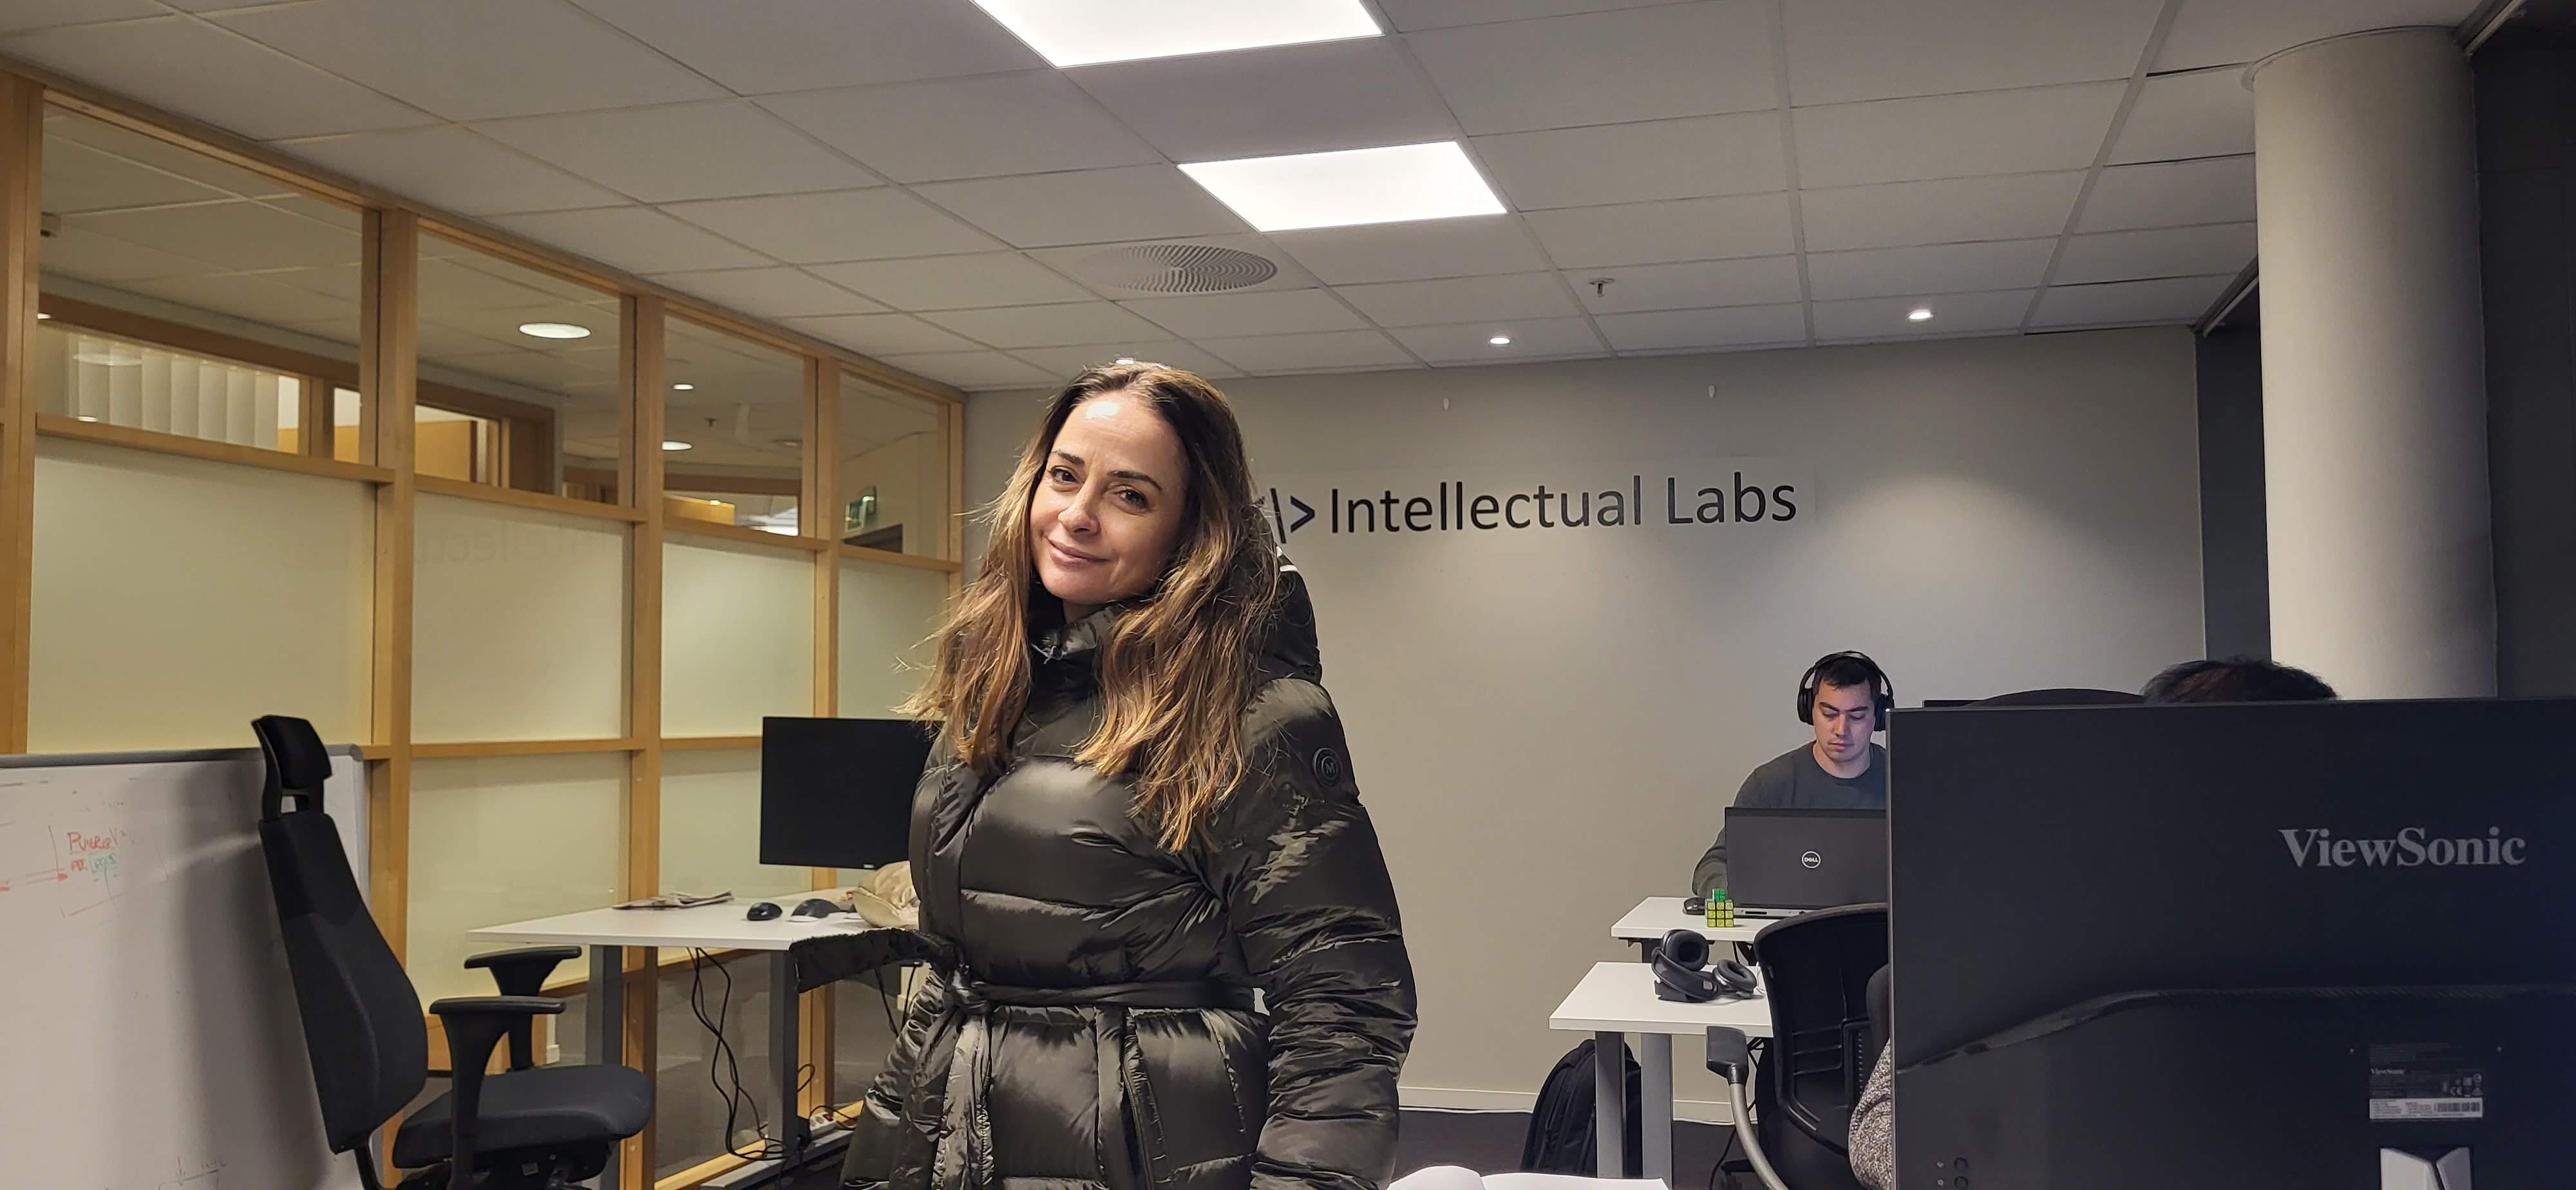 Events and activities around the world at Intellectual Labs